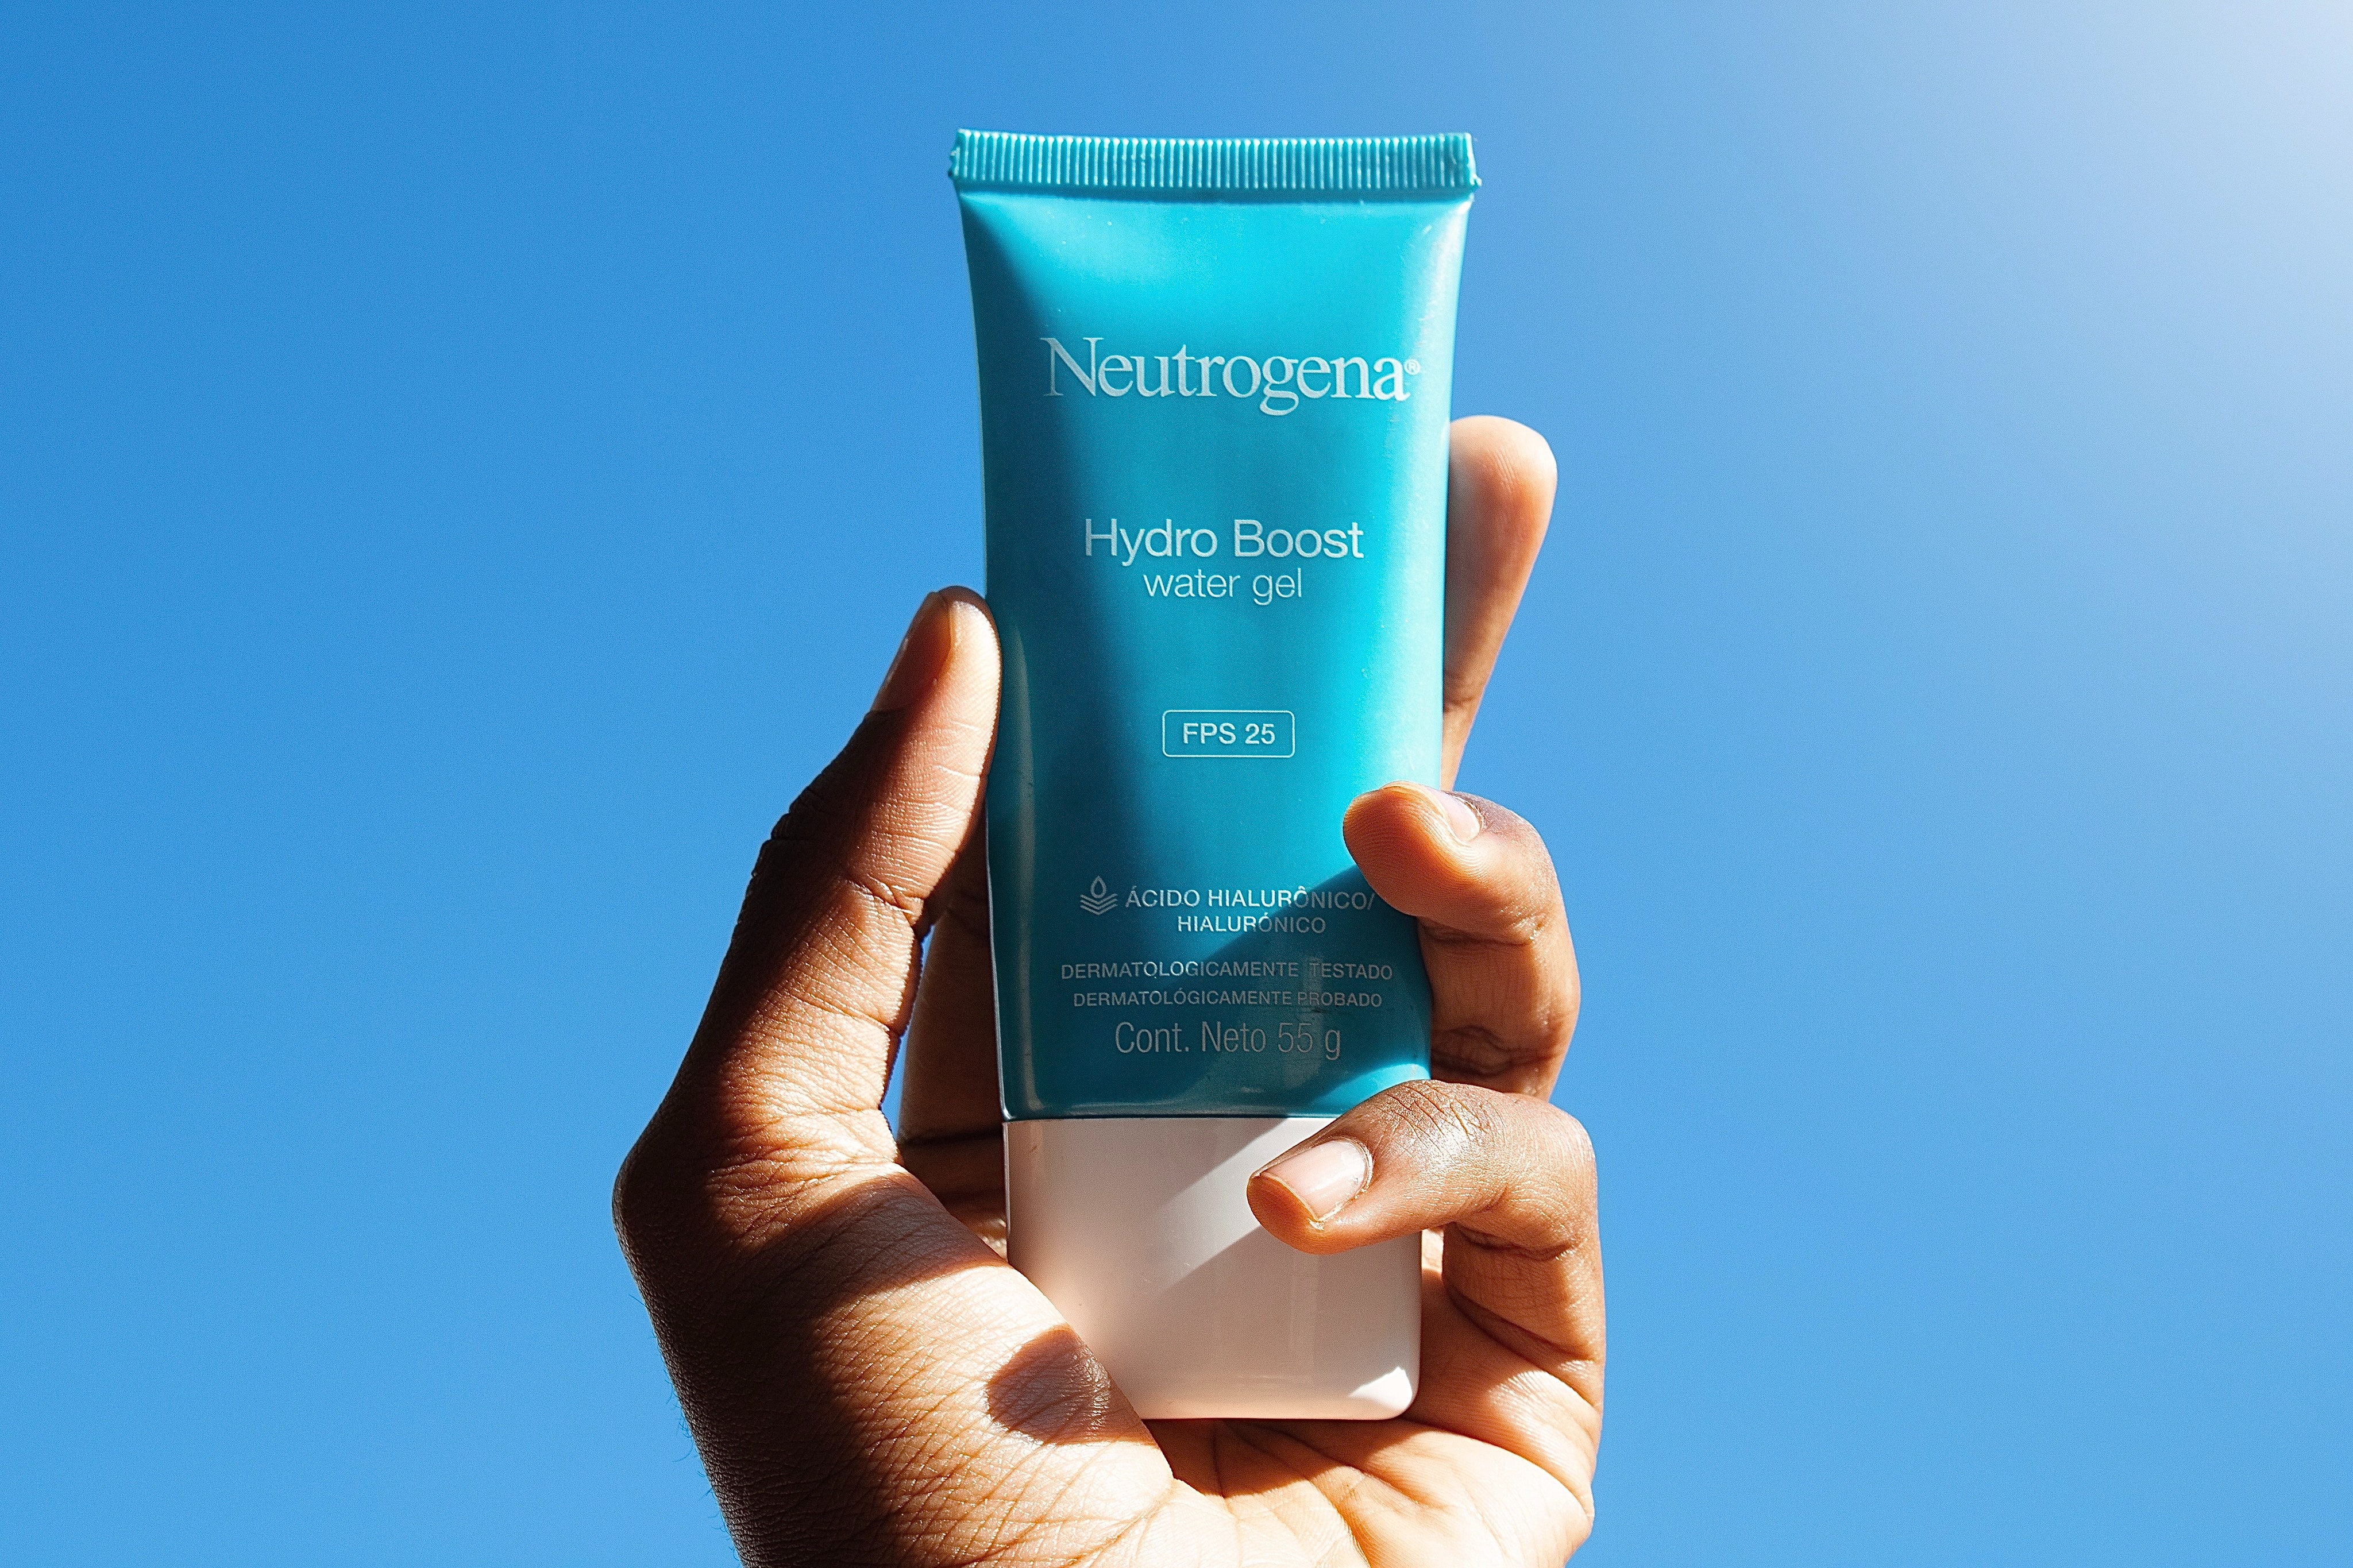 Sunscreen for photoshoots